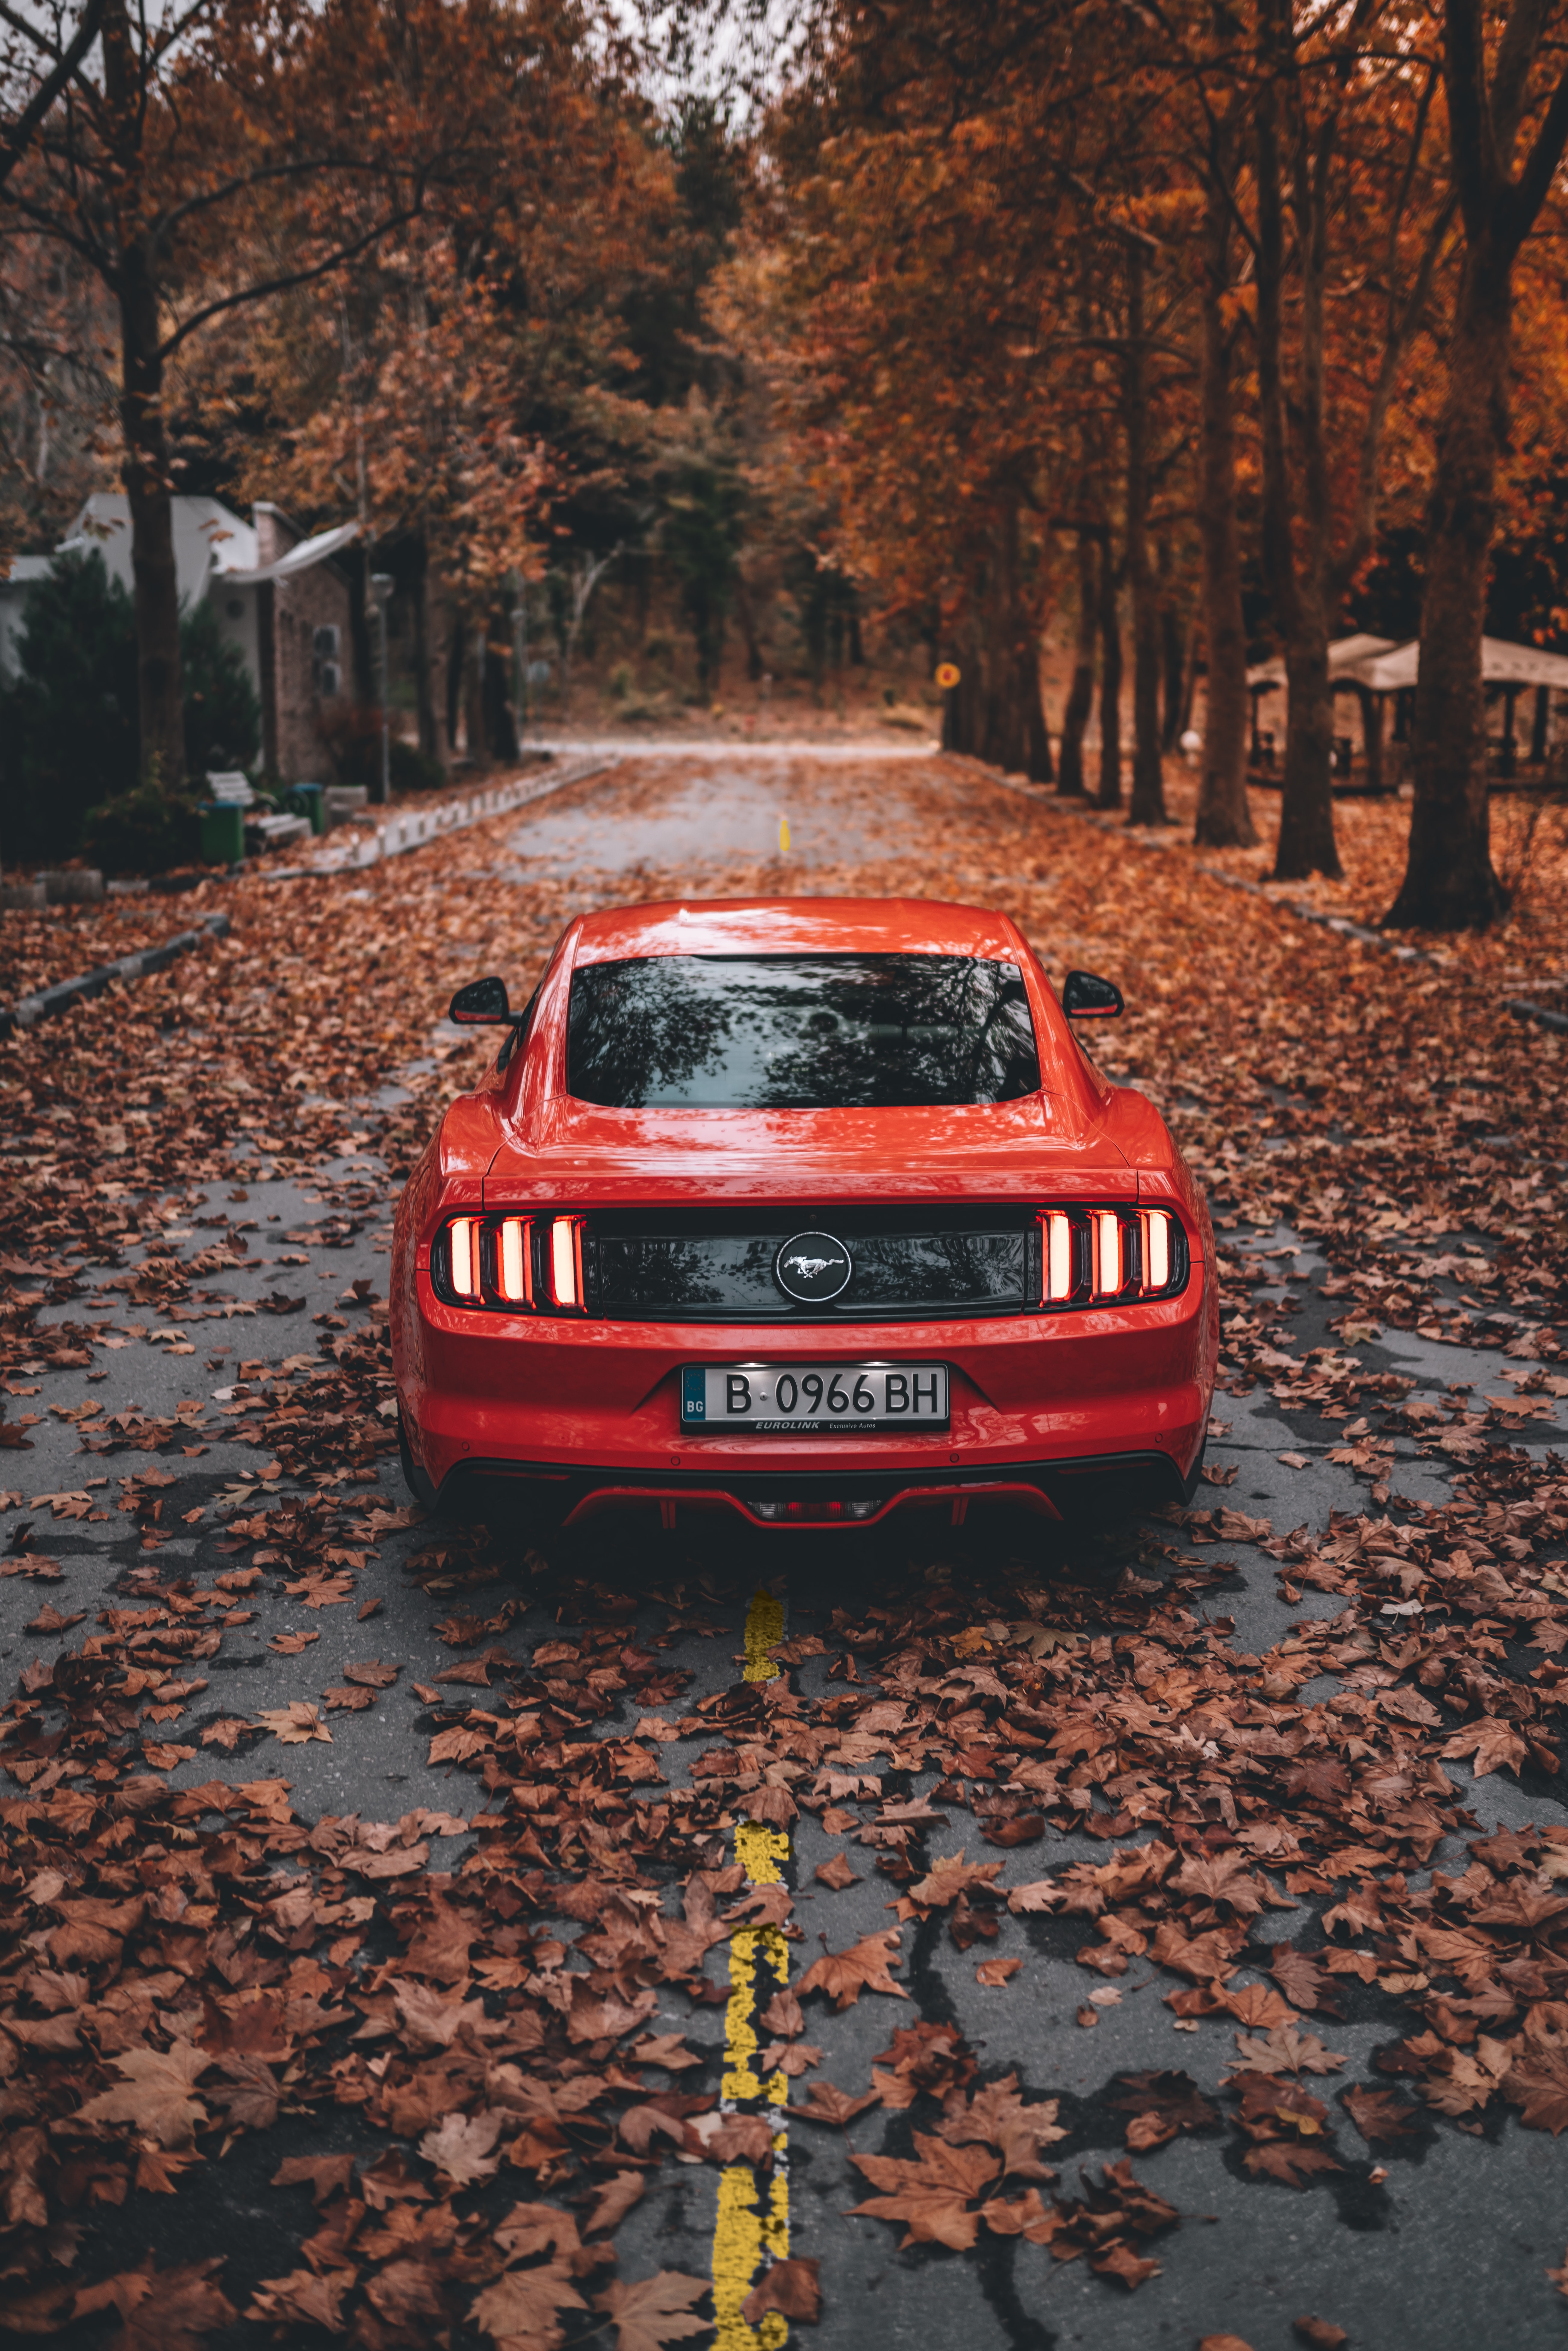 ford mustang, car, sports car, ford, cars, autumn, sports, red, road